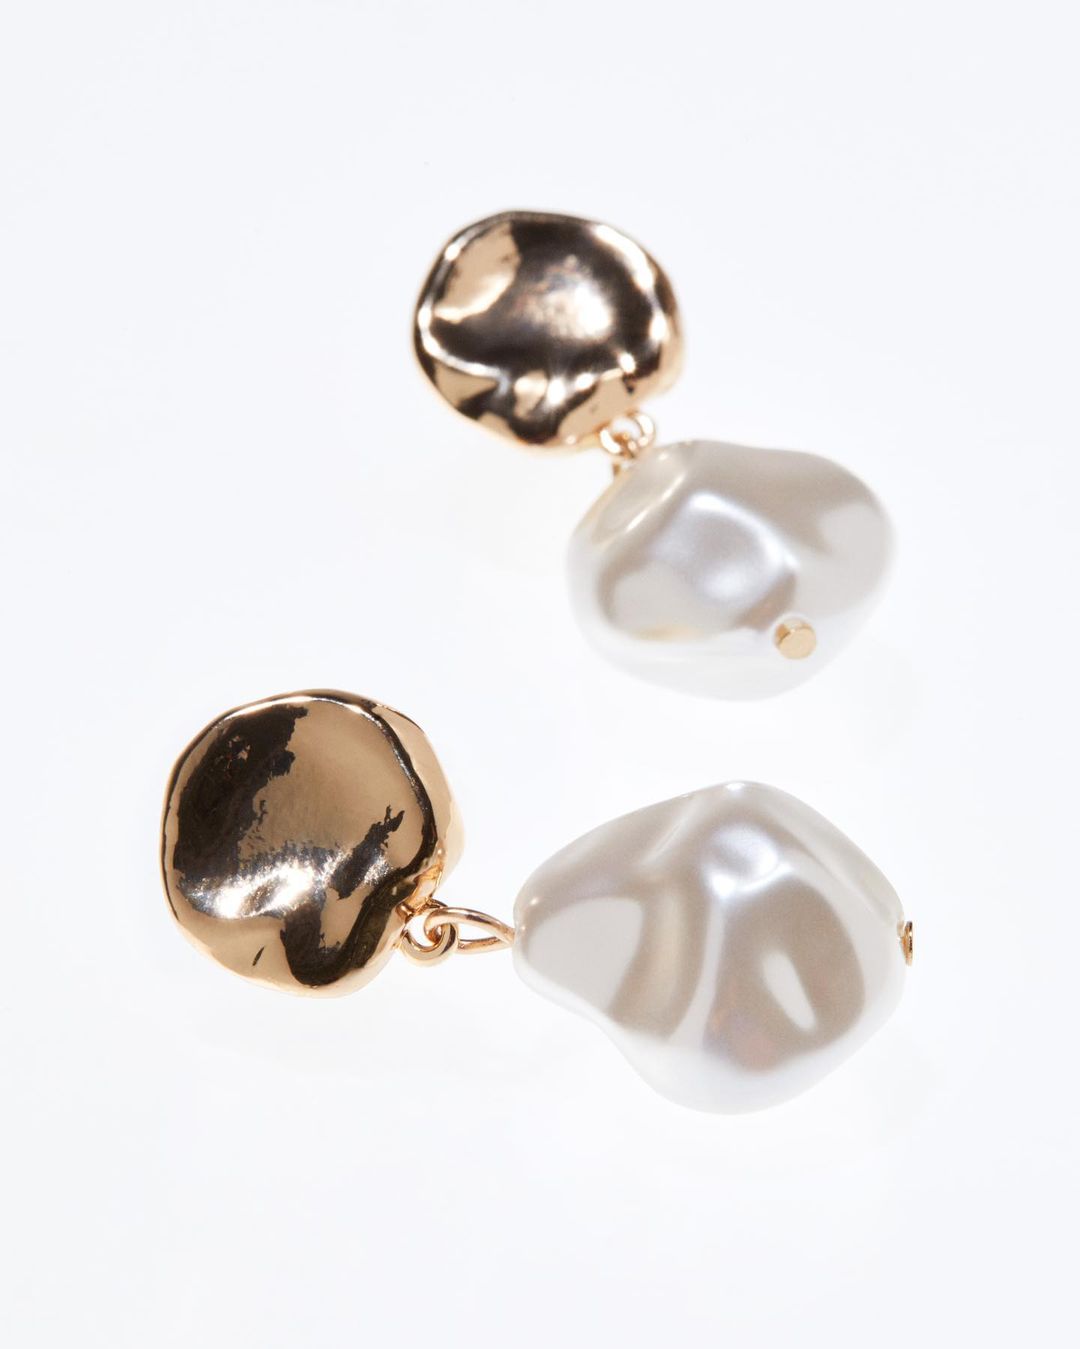 image of gold and pearl earrings against a white backdrop from H&M